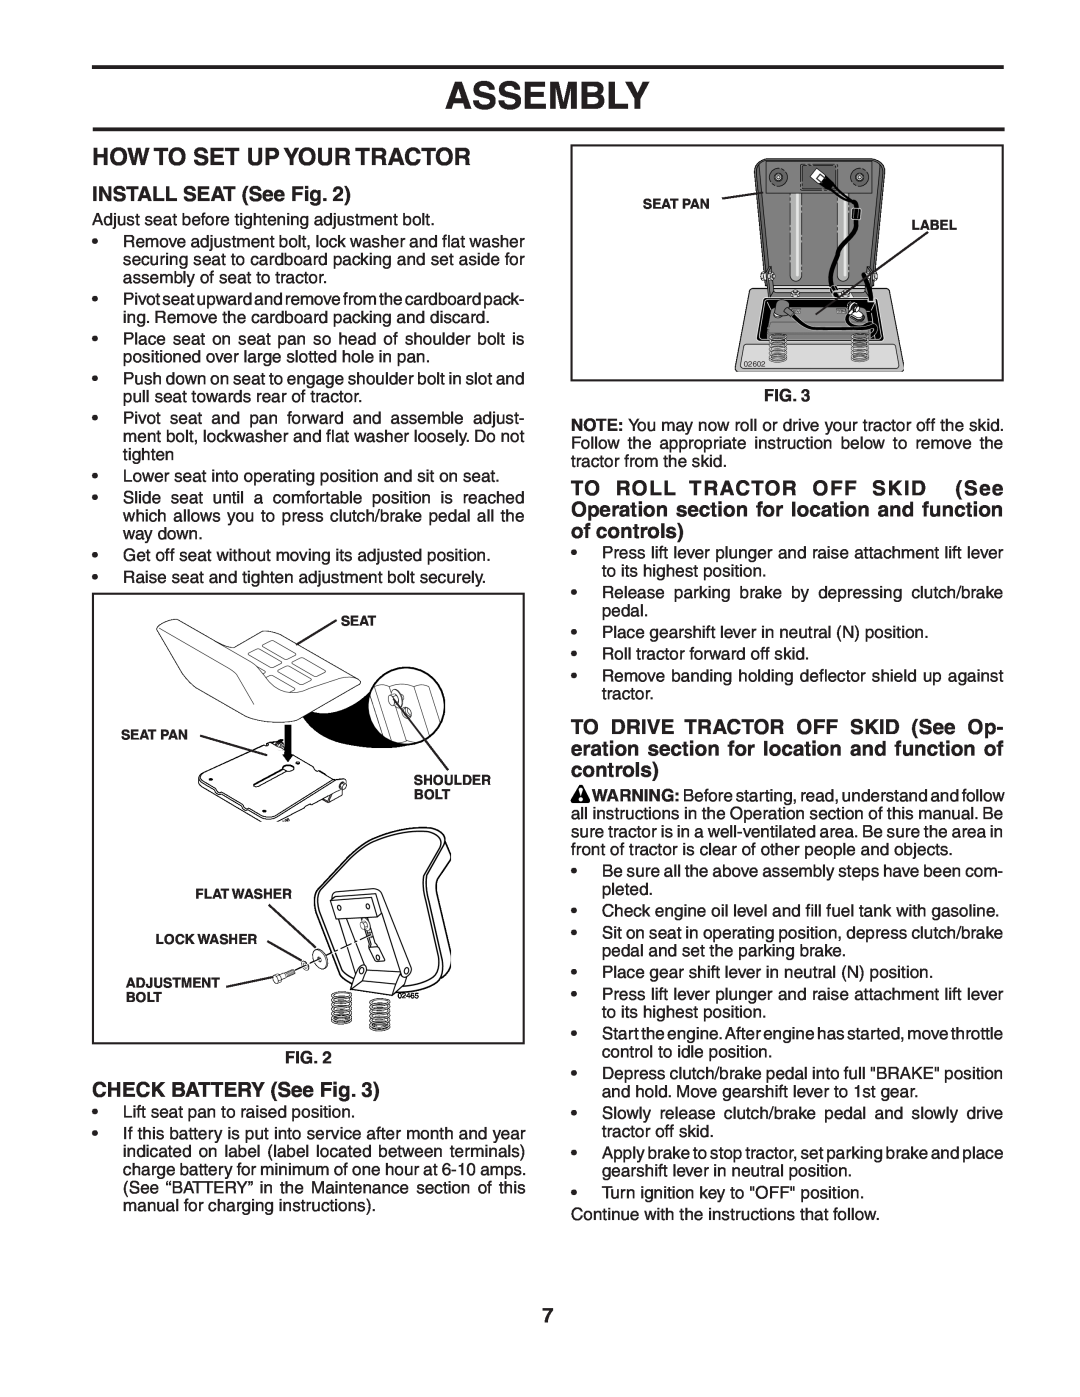 McCulloch MC1136B manual How To Set Up Your Tractor, INSTALL SEAT See Fig, CHECK BATTERY See Fig, Assembly 